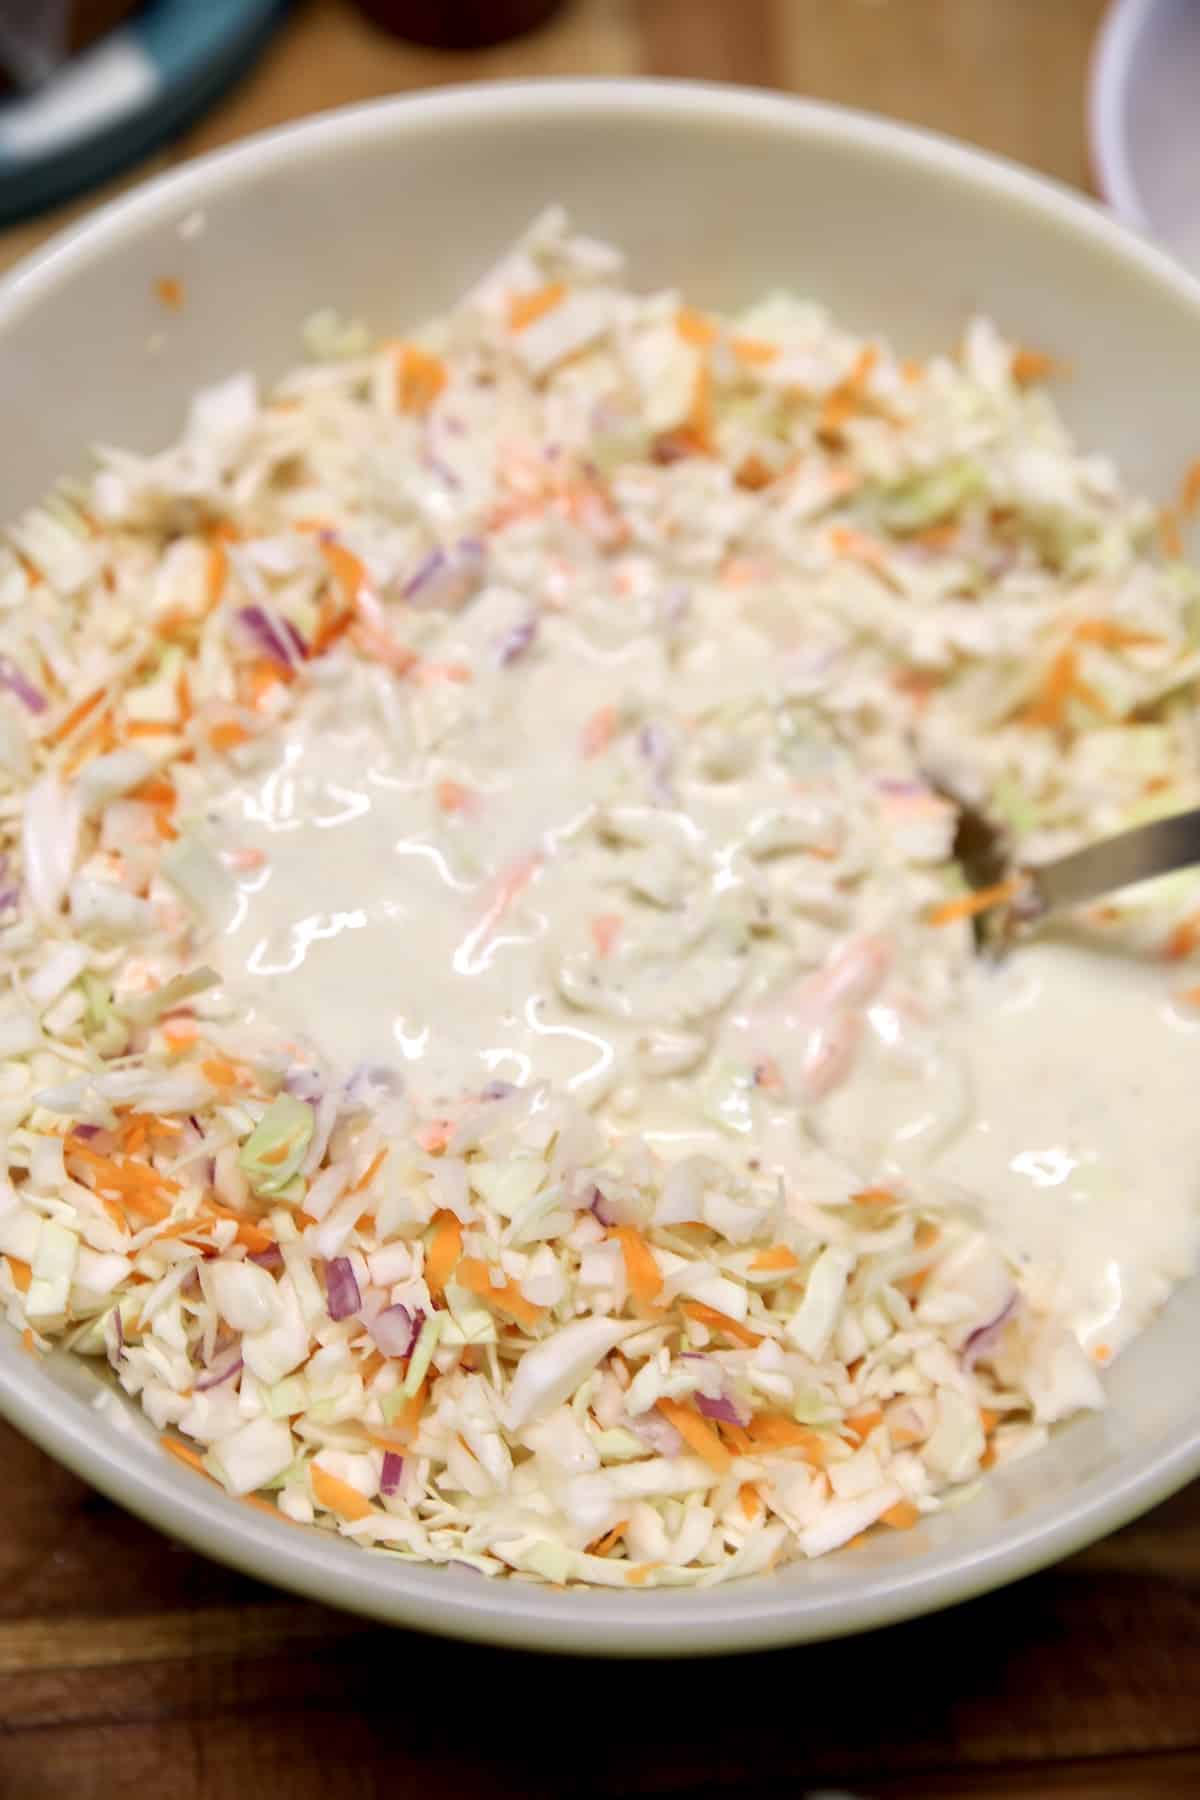 Making coleslaw in a bowl with dressing.